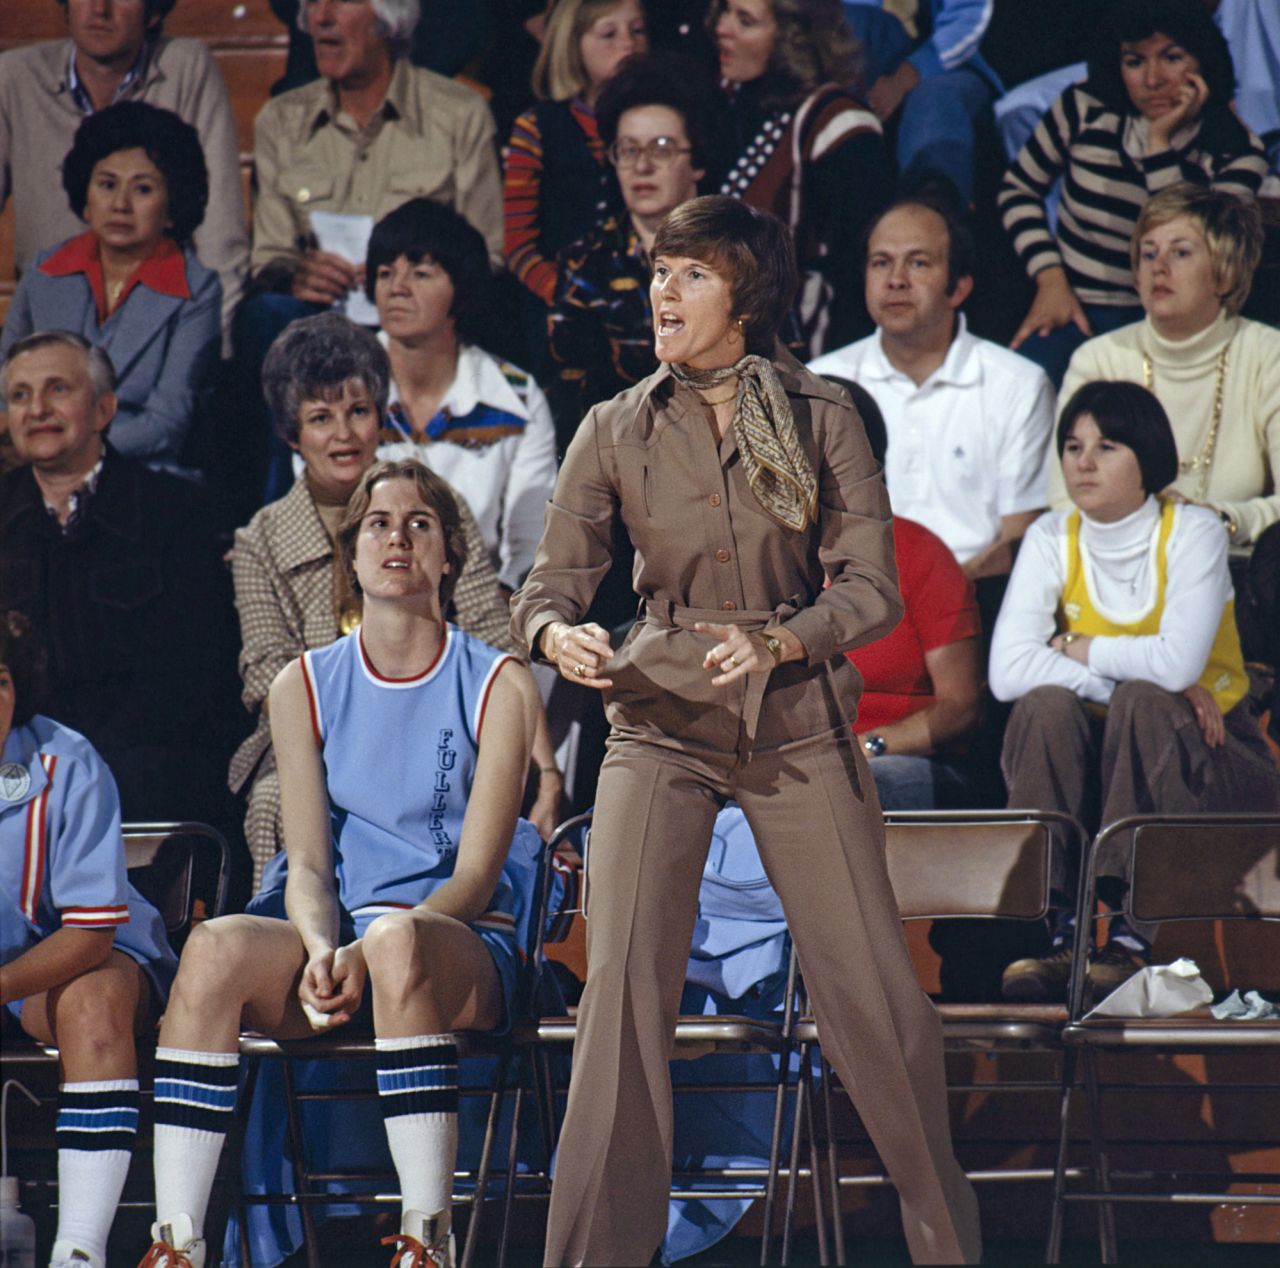 <a href="https://www.cnn.com/2022/12/15/sport/basketball-pioneer-billie-moore-dies-spt/index.html" target="_blank">Billie Moore,</a> a Hall of Fame basketball coach who was head coach of the first US women's Olympic basketball team, died December 14 at the age of 79. Moore was also the first head coach to lead two schools to national championships in women's basketball.